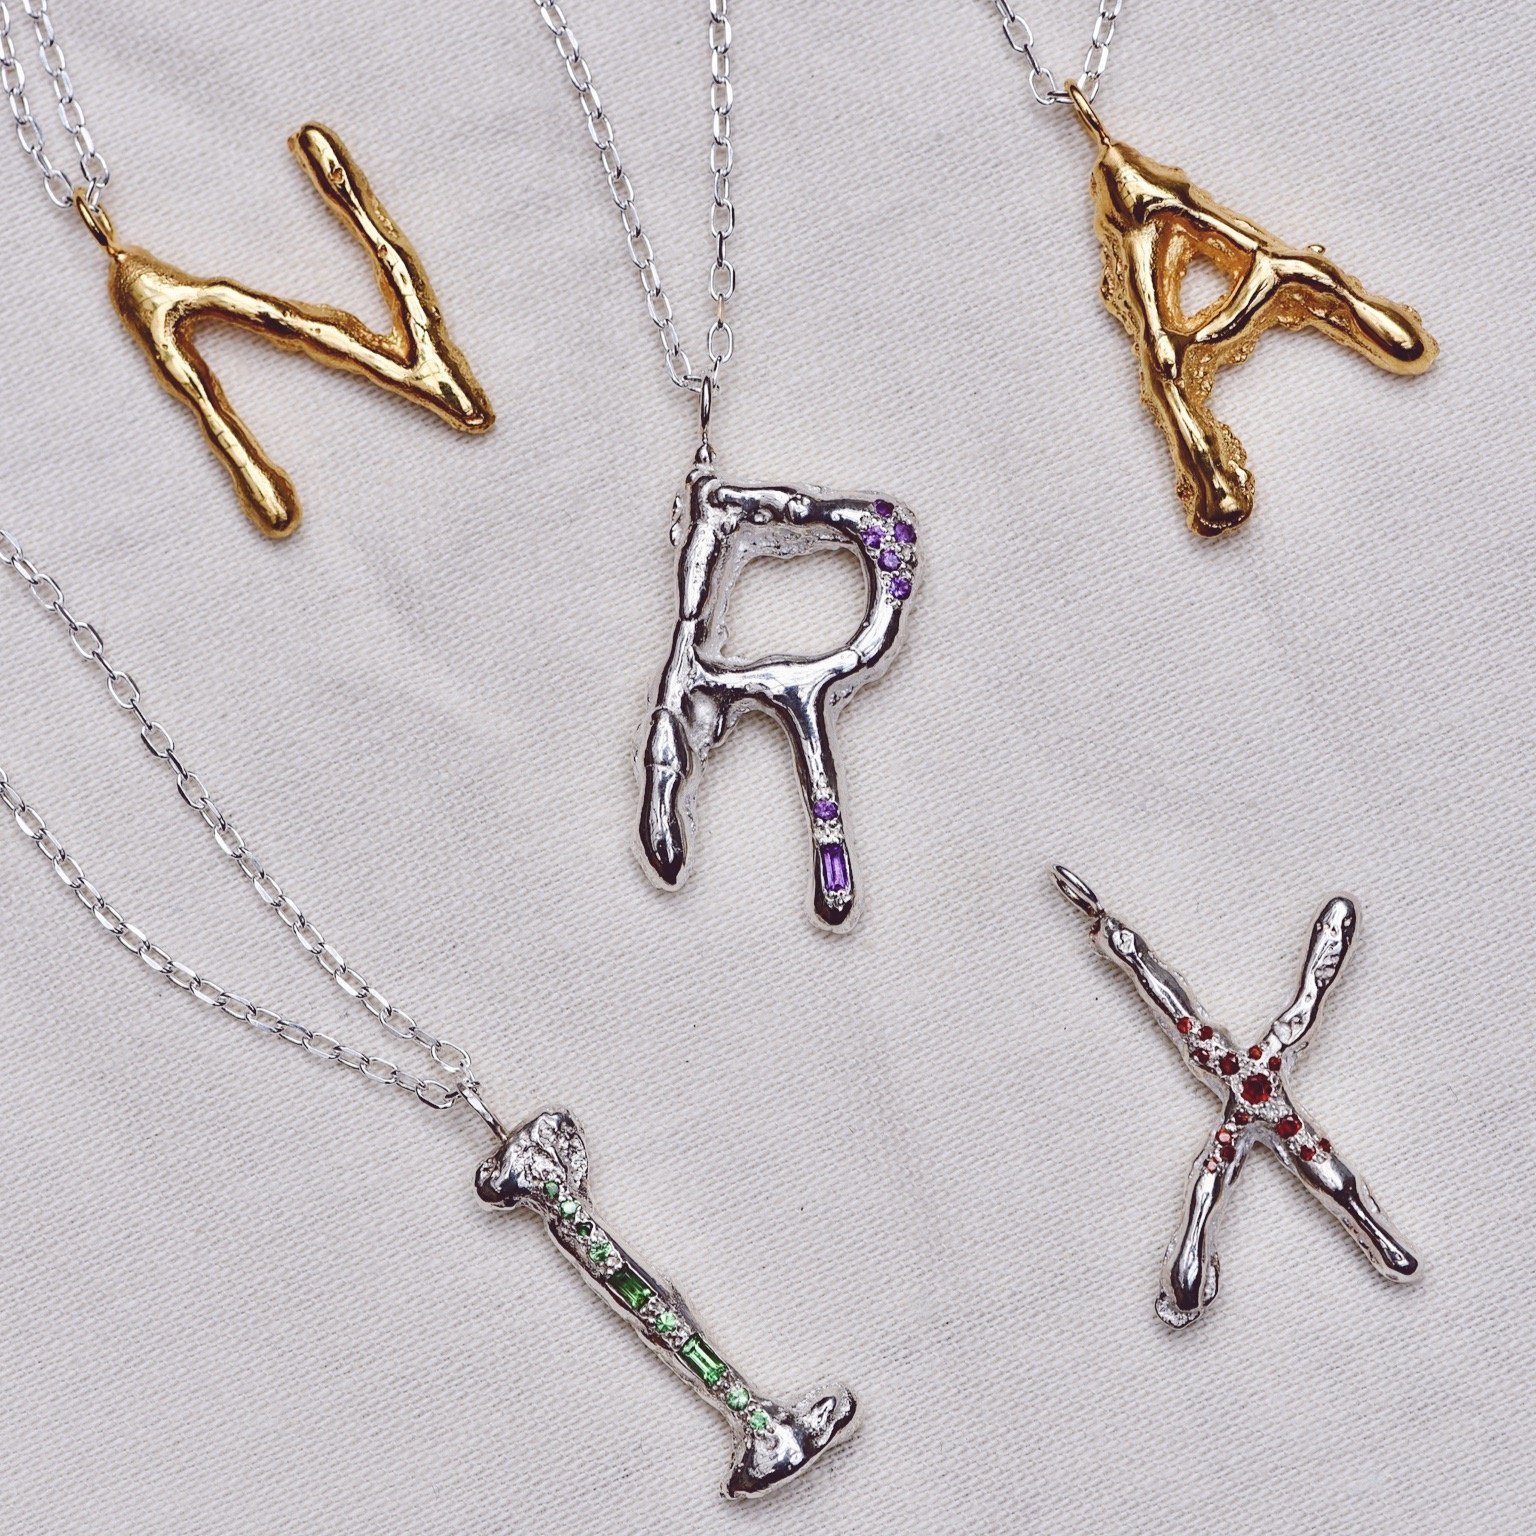 CAST YOUR OWN INITIAL NECKLACE